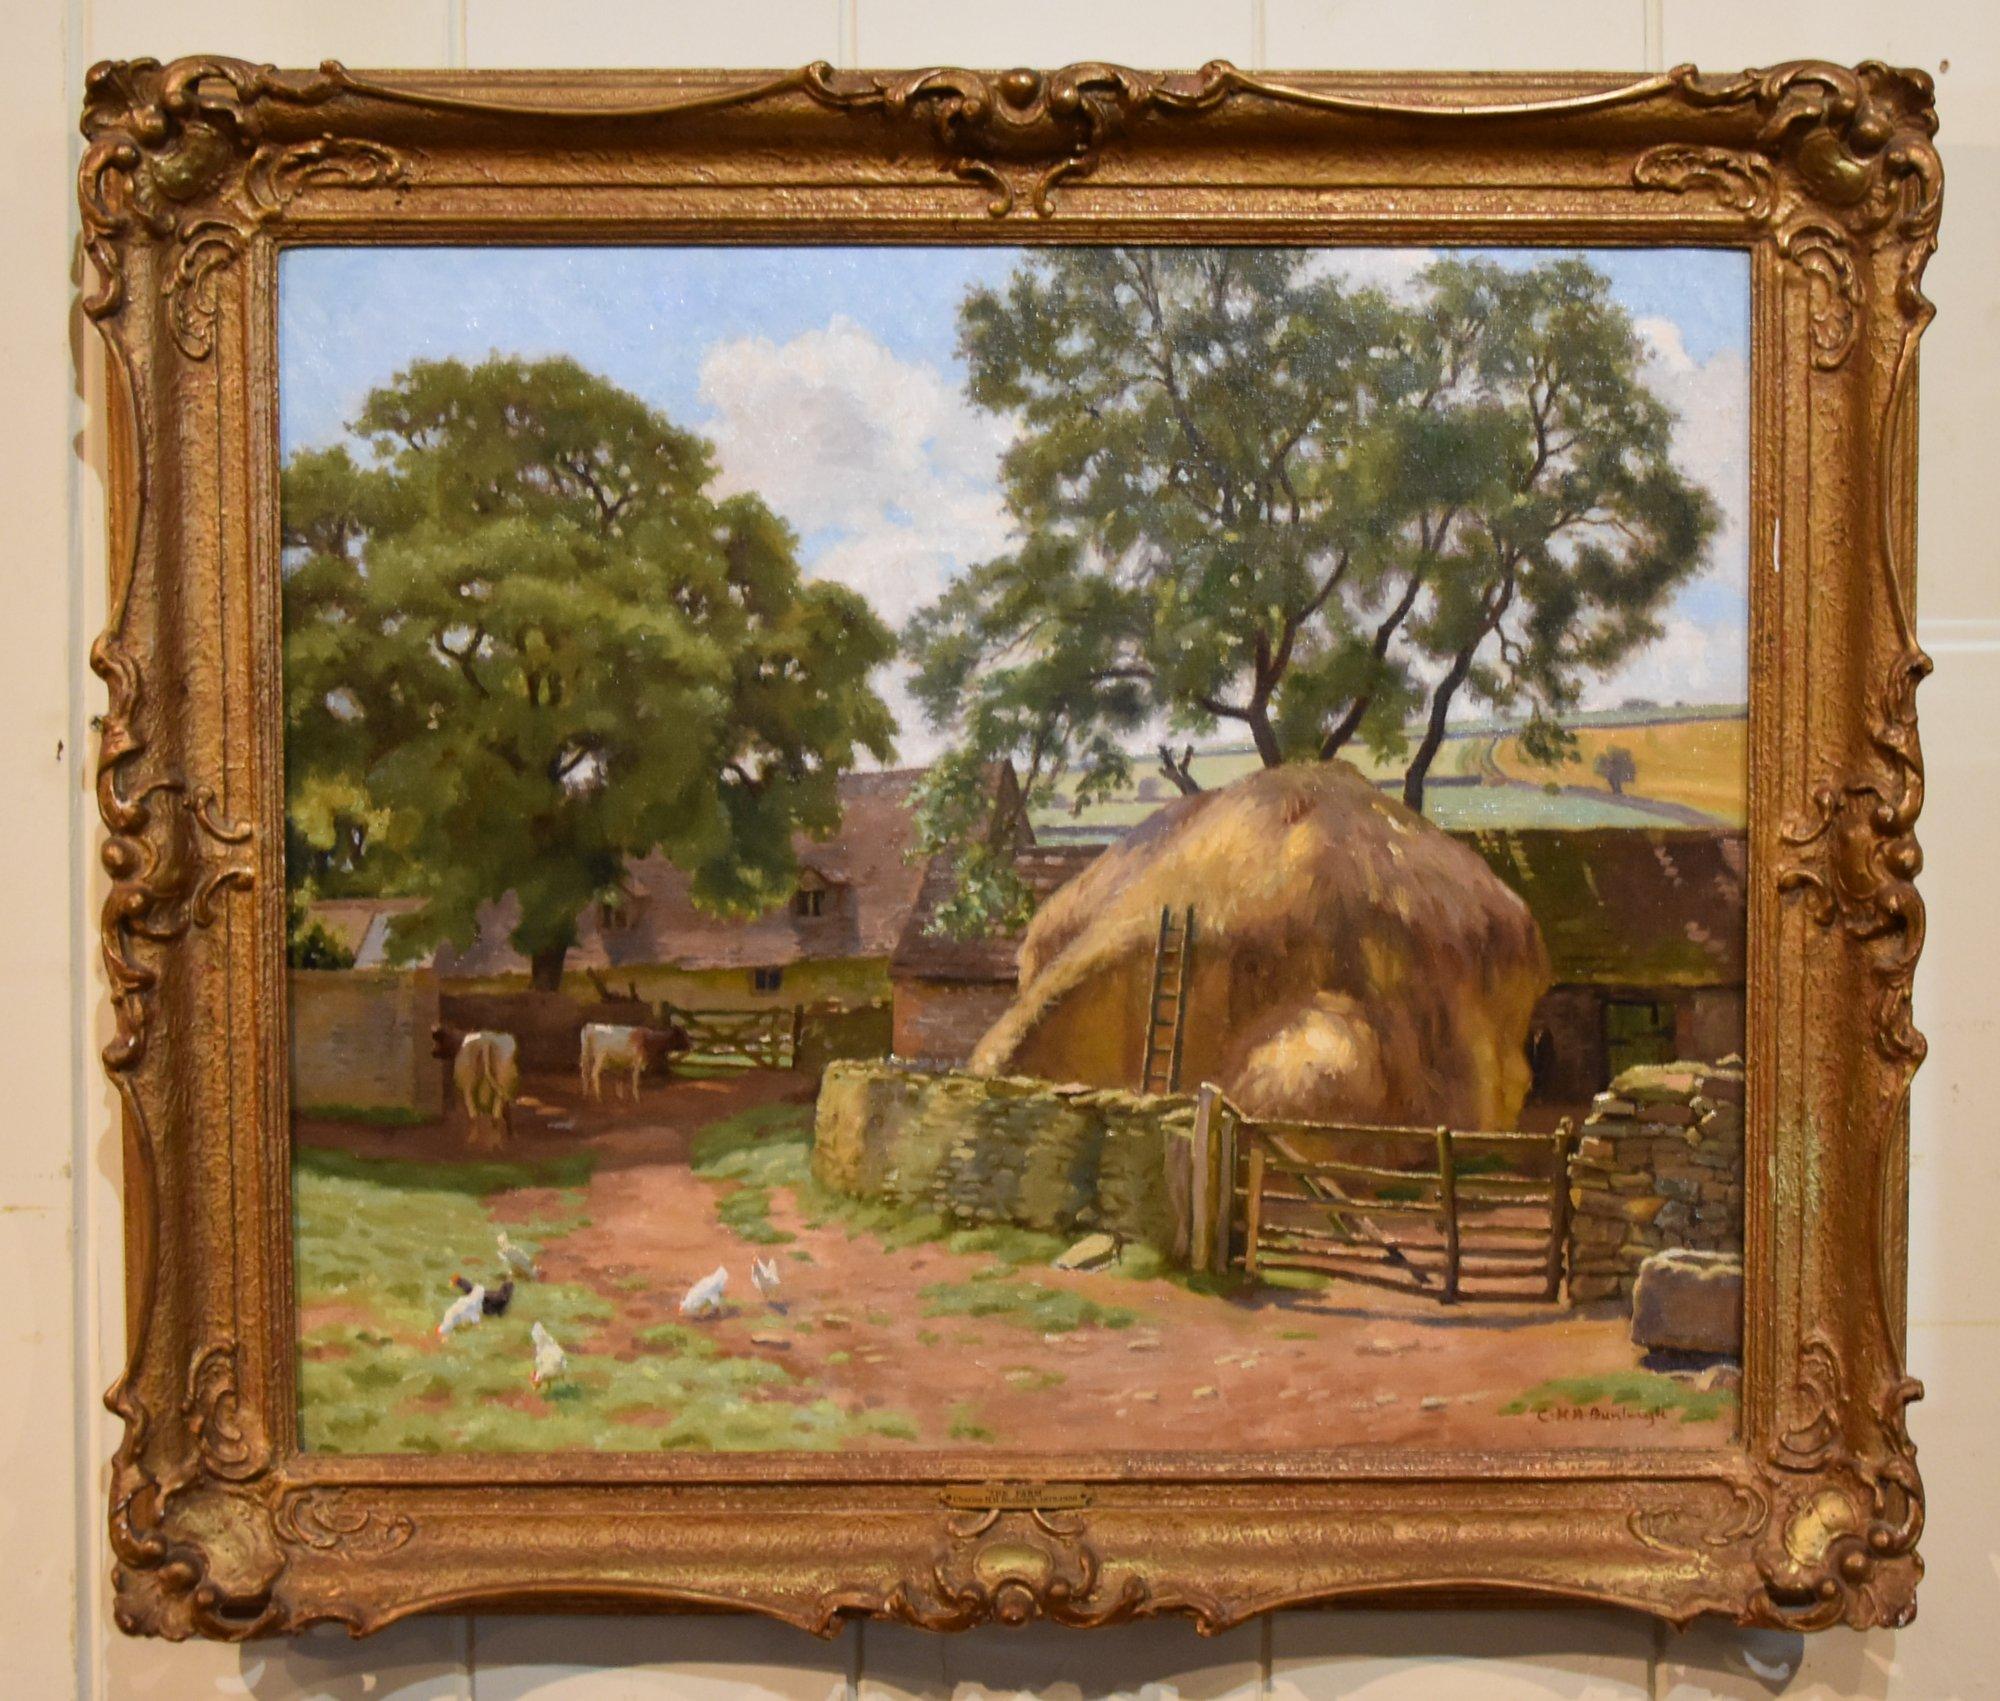 Oil Painting by Charles Henry Burleigh  "The Farmstead" R.B.A 1875- 1956 Brighton painter member of the Royal of Institute of painters. Also exhibited at the Royal Academy London Salon. Fine Art society and Royal society of British artists. Oil on